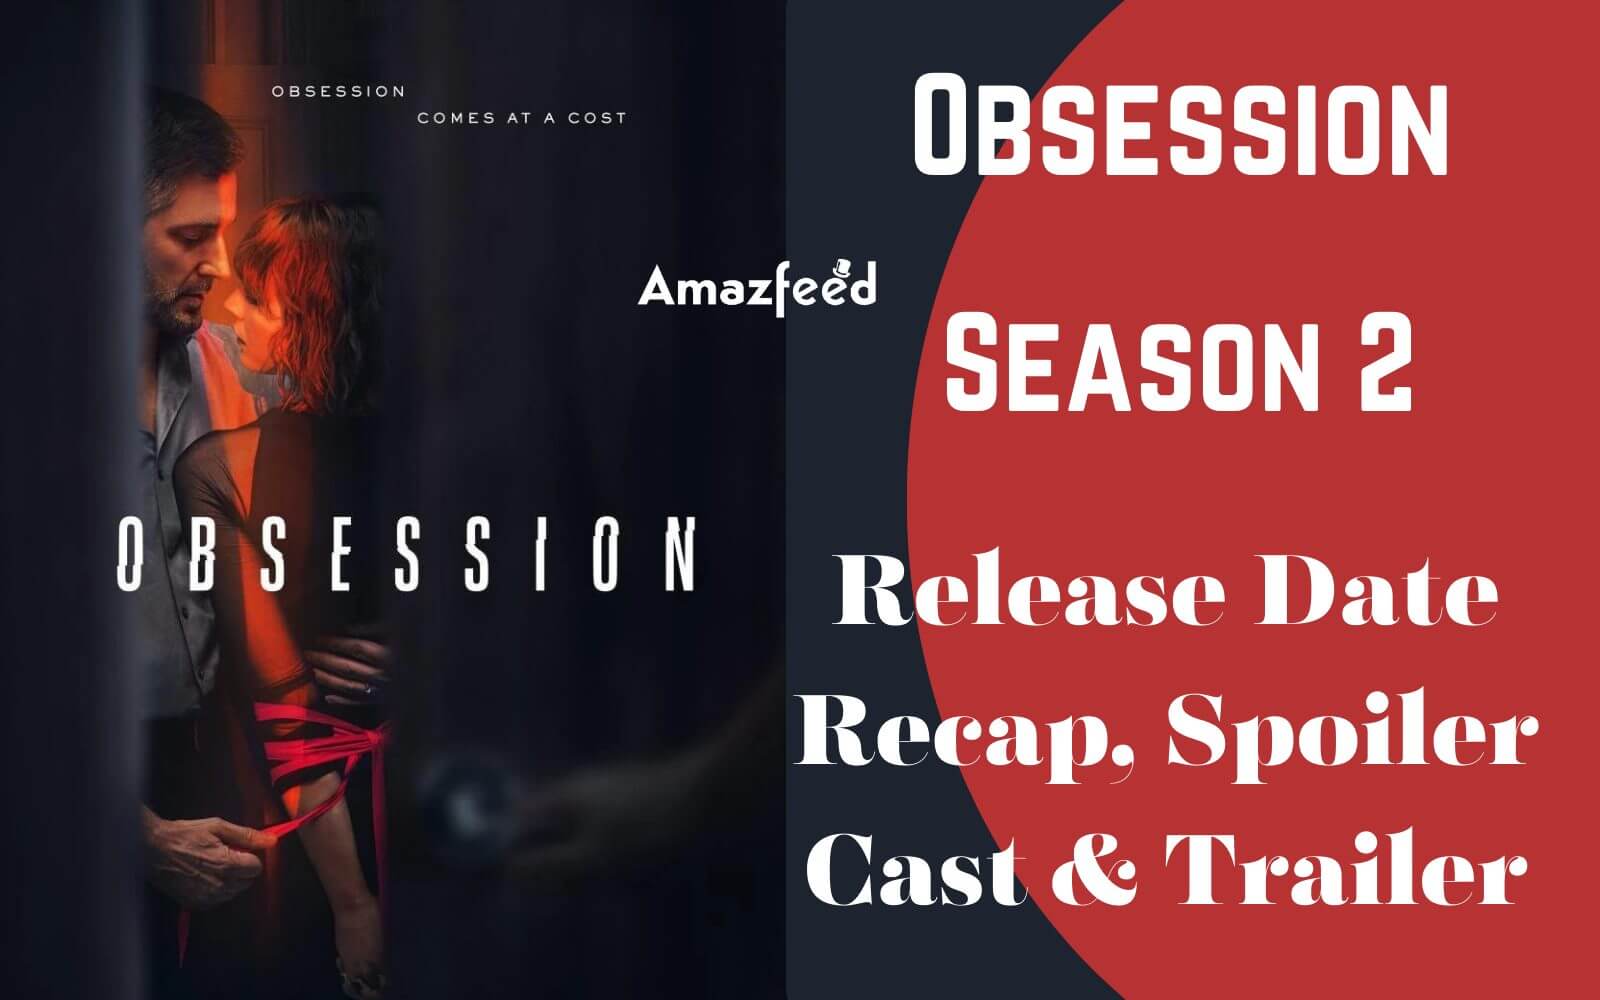 Is Do It Yourself!! Season 2 Renewed Or Canceled? Do It Yourself!! Season 2  Release Date and Everything you Need to know » Amazfeed